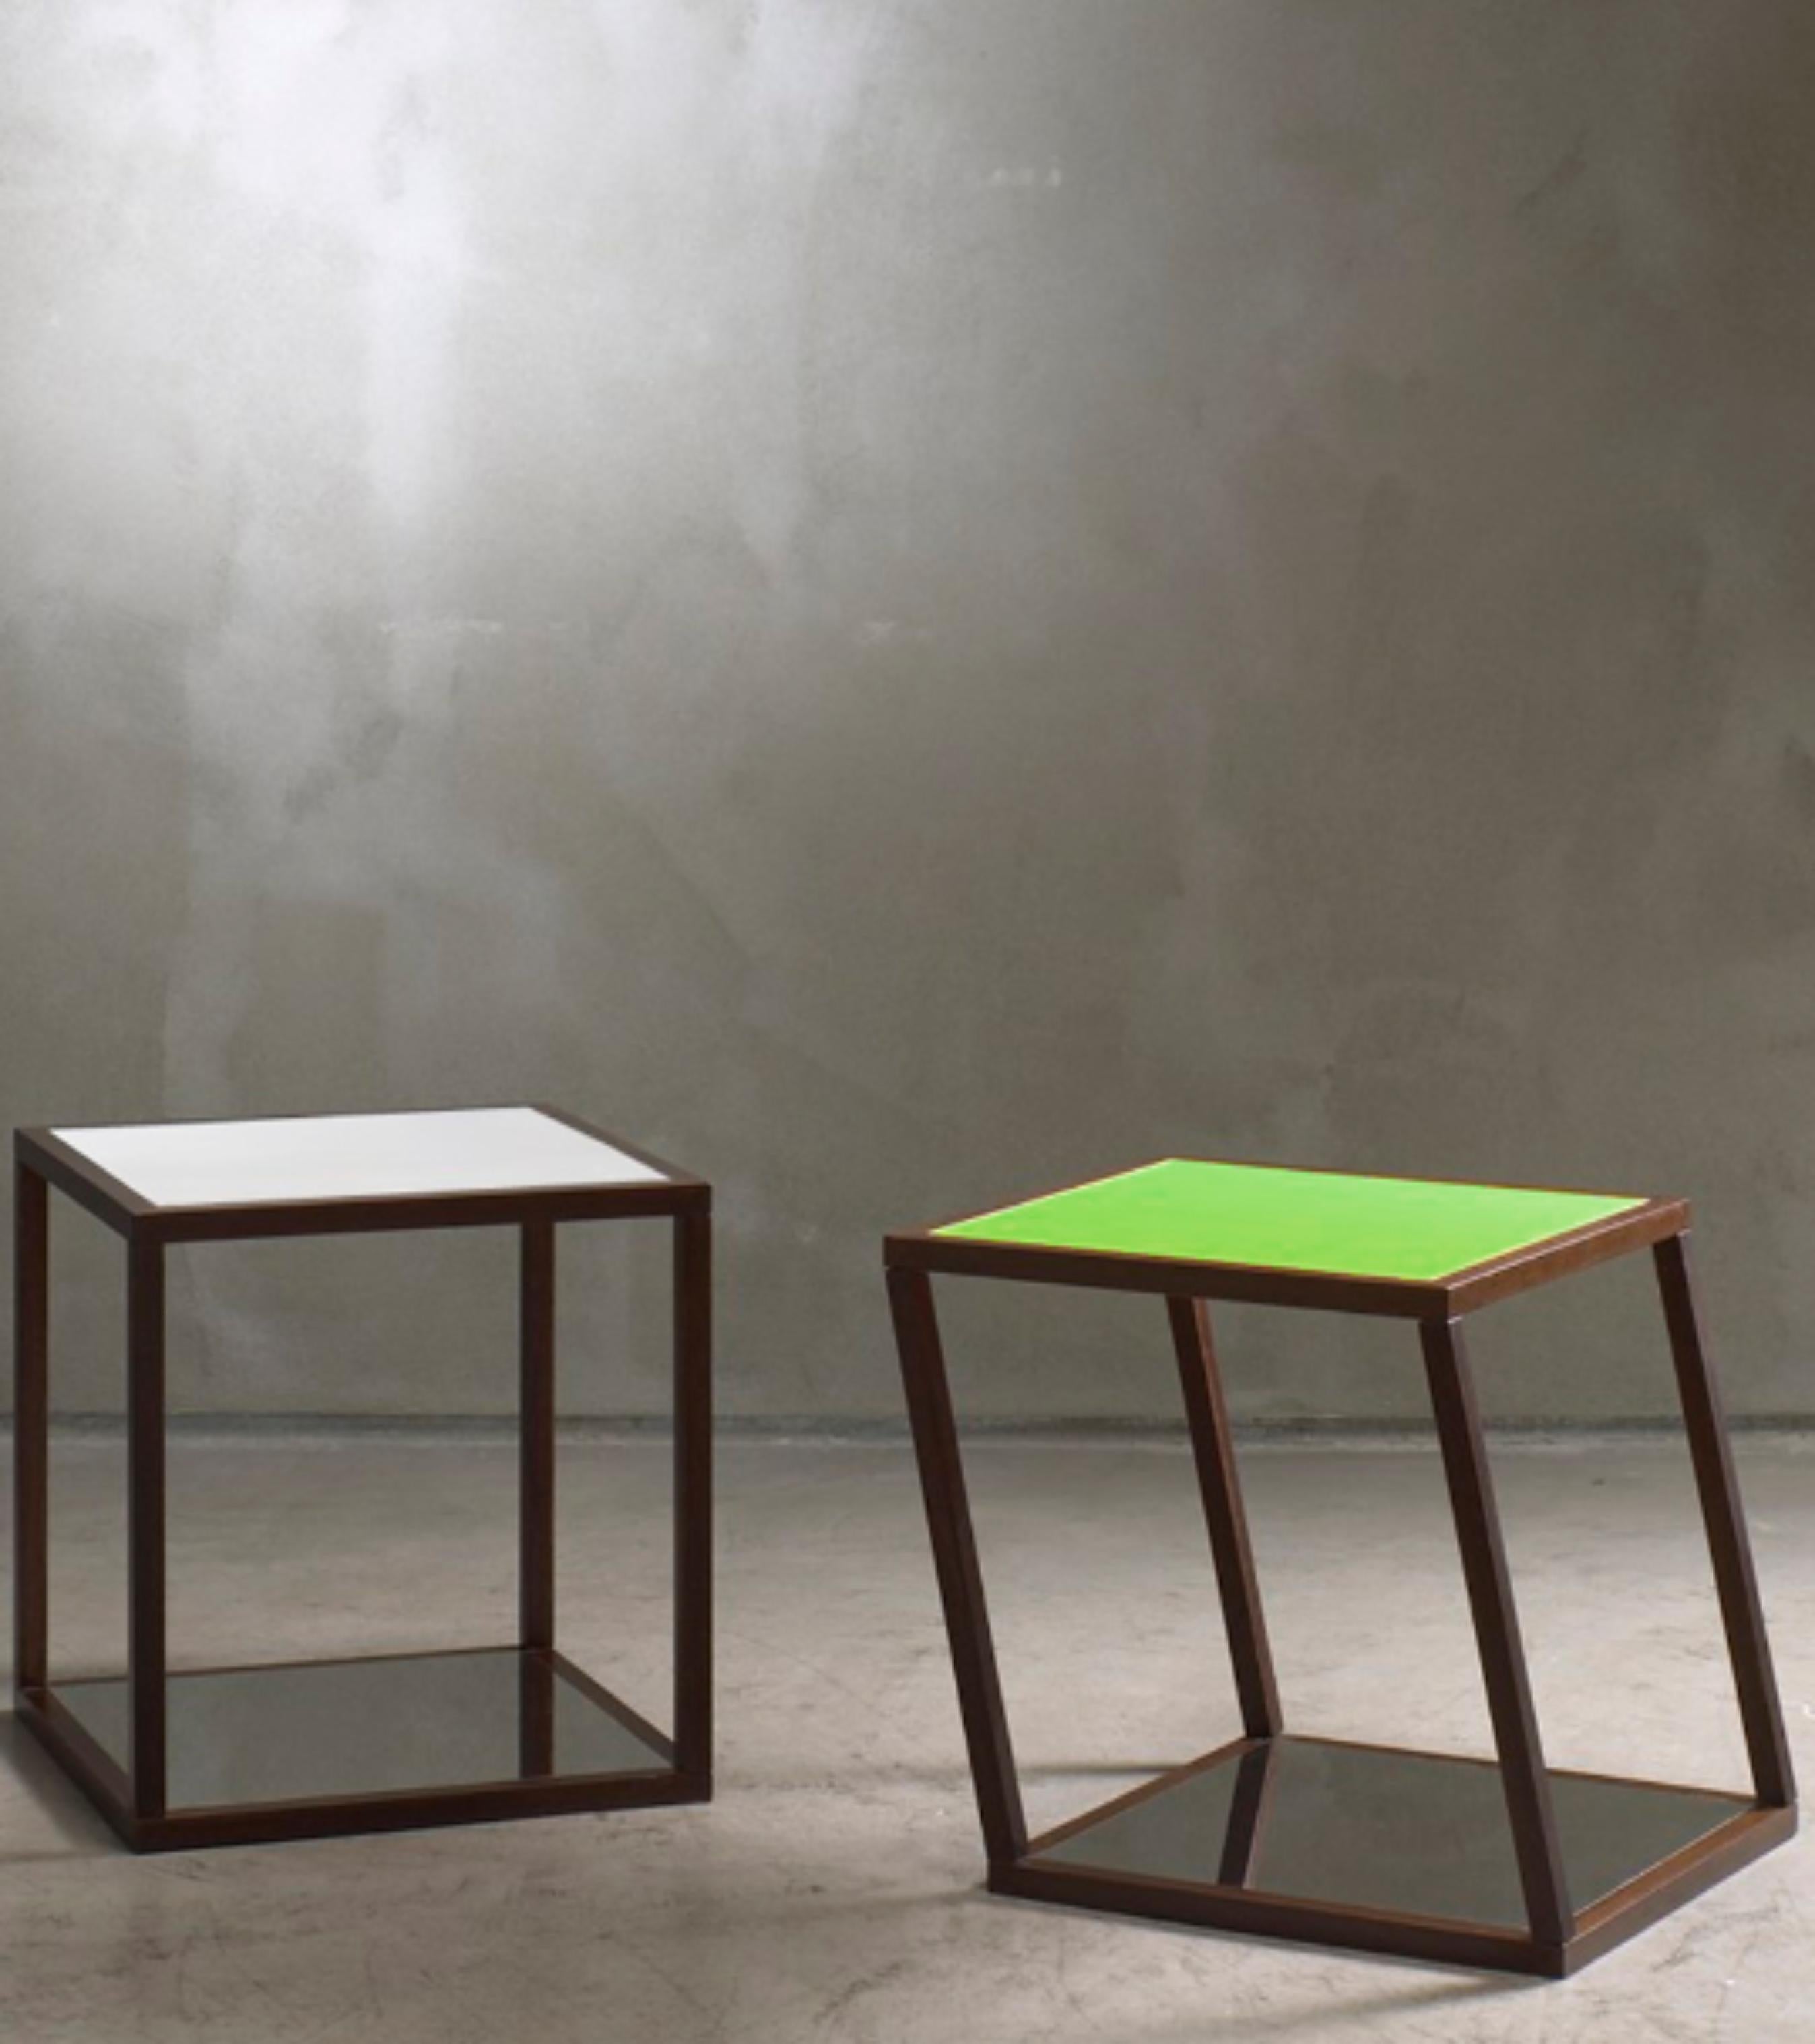 CF LT07.5 low table by Caturegli Formica
Dimensions: W 38 x D 38 H 40 cm
Materials: Wood, Plastic

The top of low tables changes its colour according to the point of view.
S-Steel structure available

Biographical notes

Beppe Caturegli